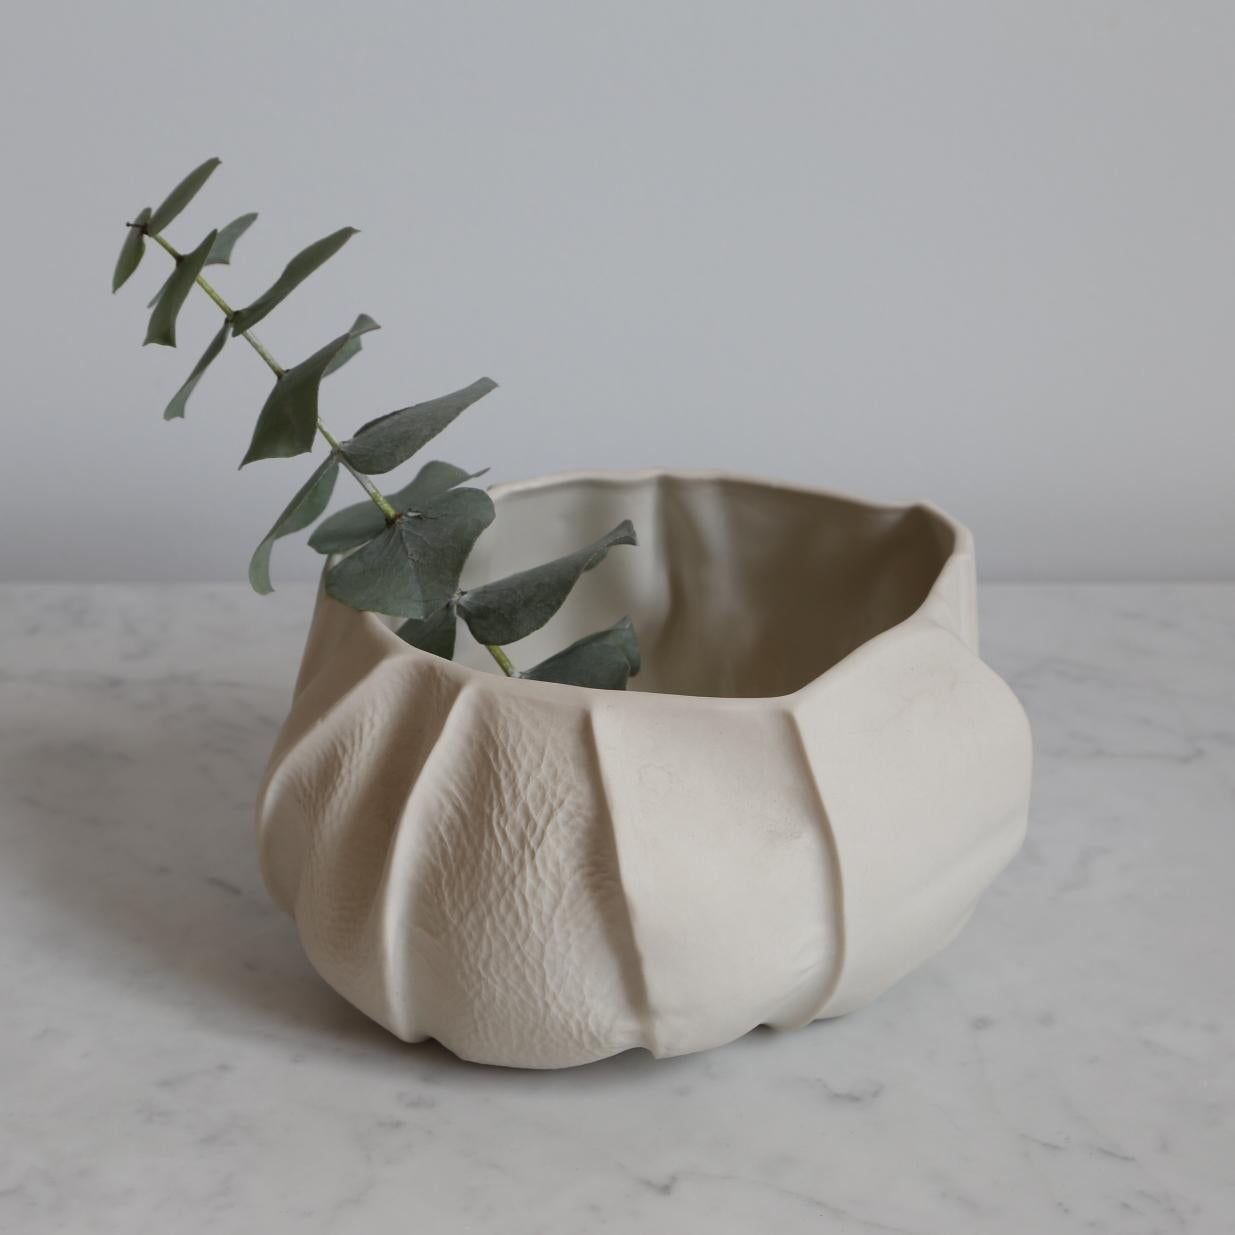 This is a one of a kind Kawa bowl designed and made by Luft Tanaka.

To make this piece:
-Luft collected scrap leather and sewed it freeform to make a small bowl-shaped mold.
-Liquid porcelain is poured directly into each leather mold. Once